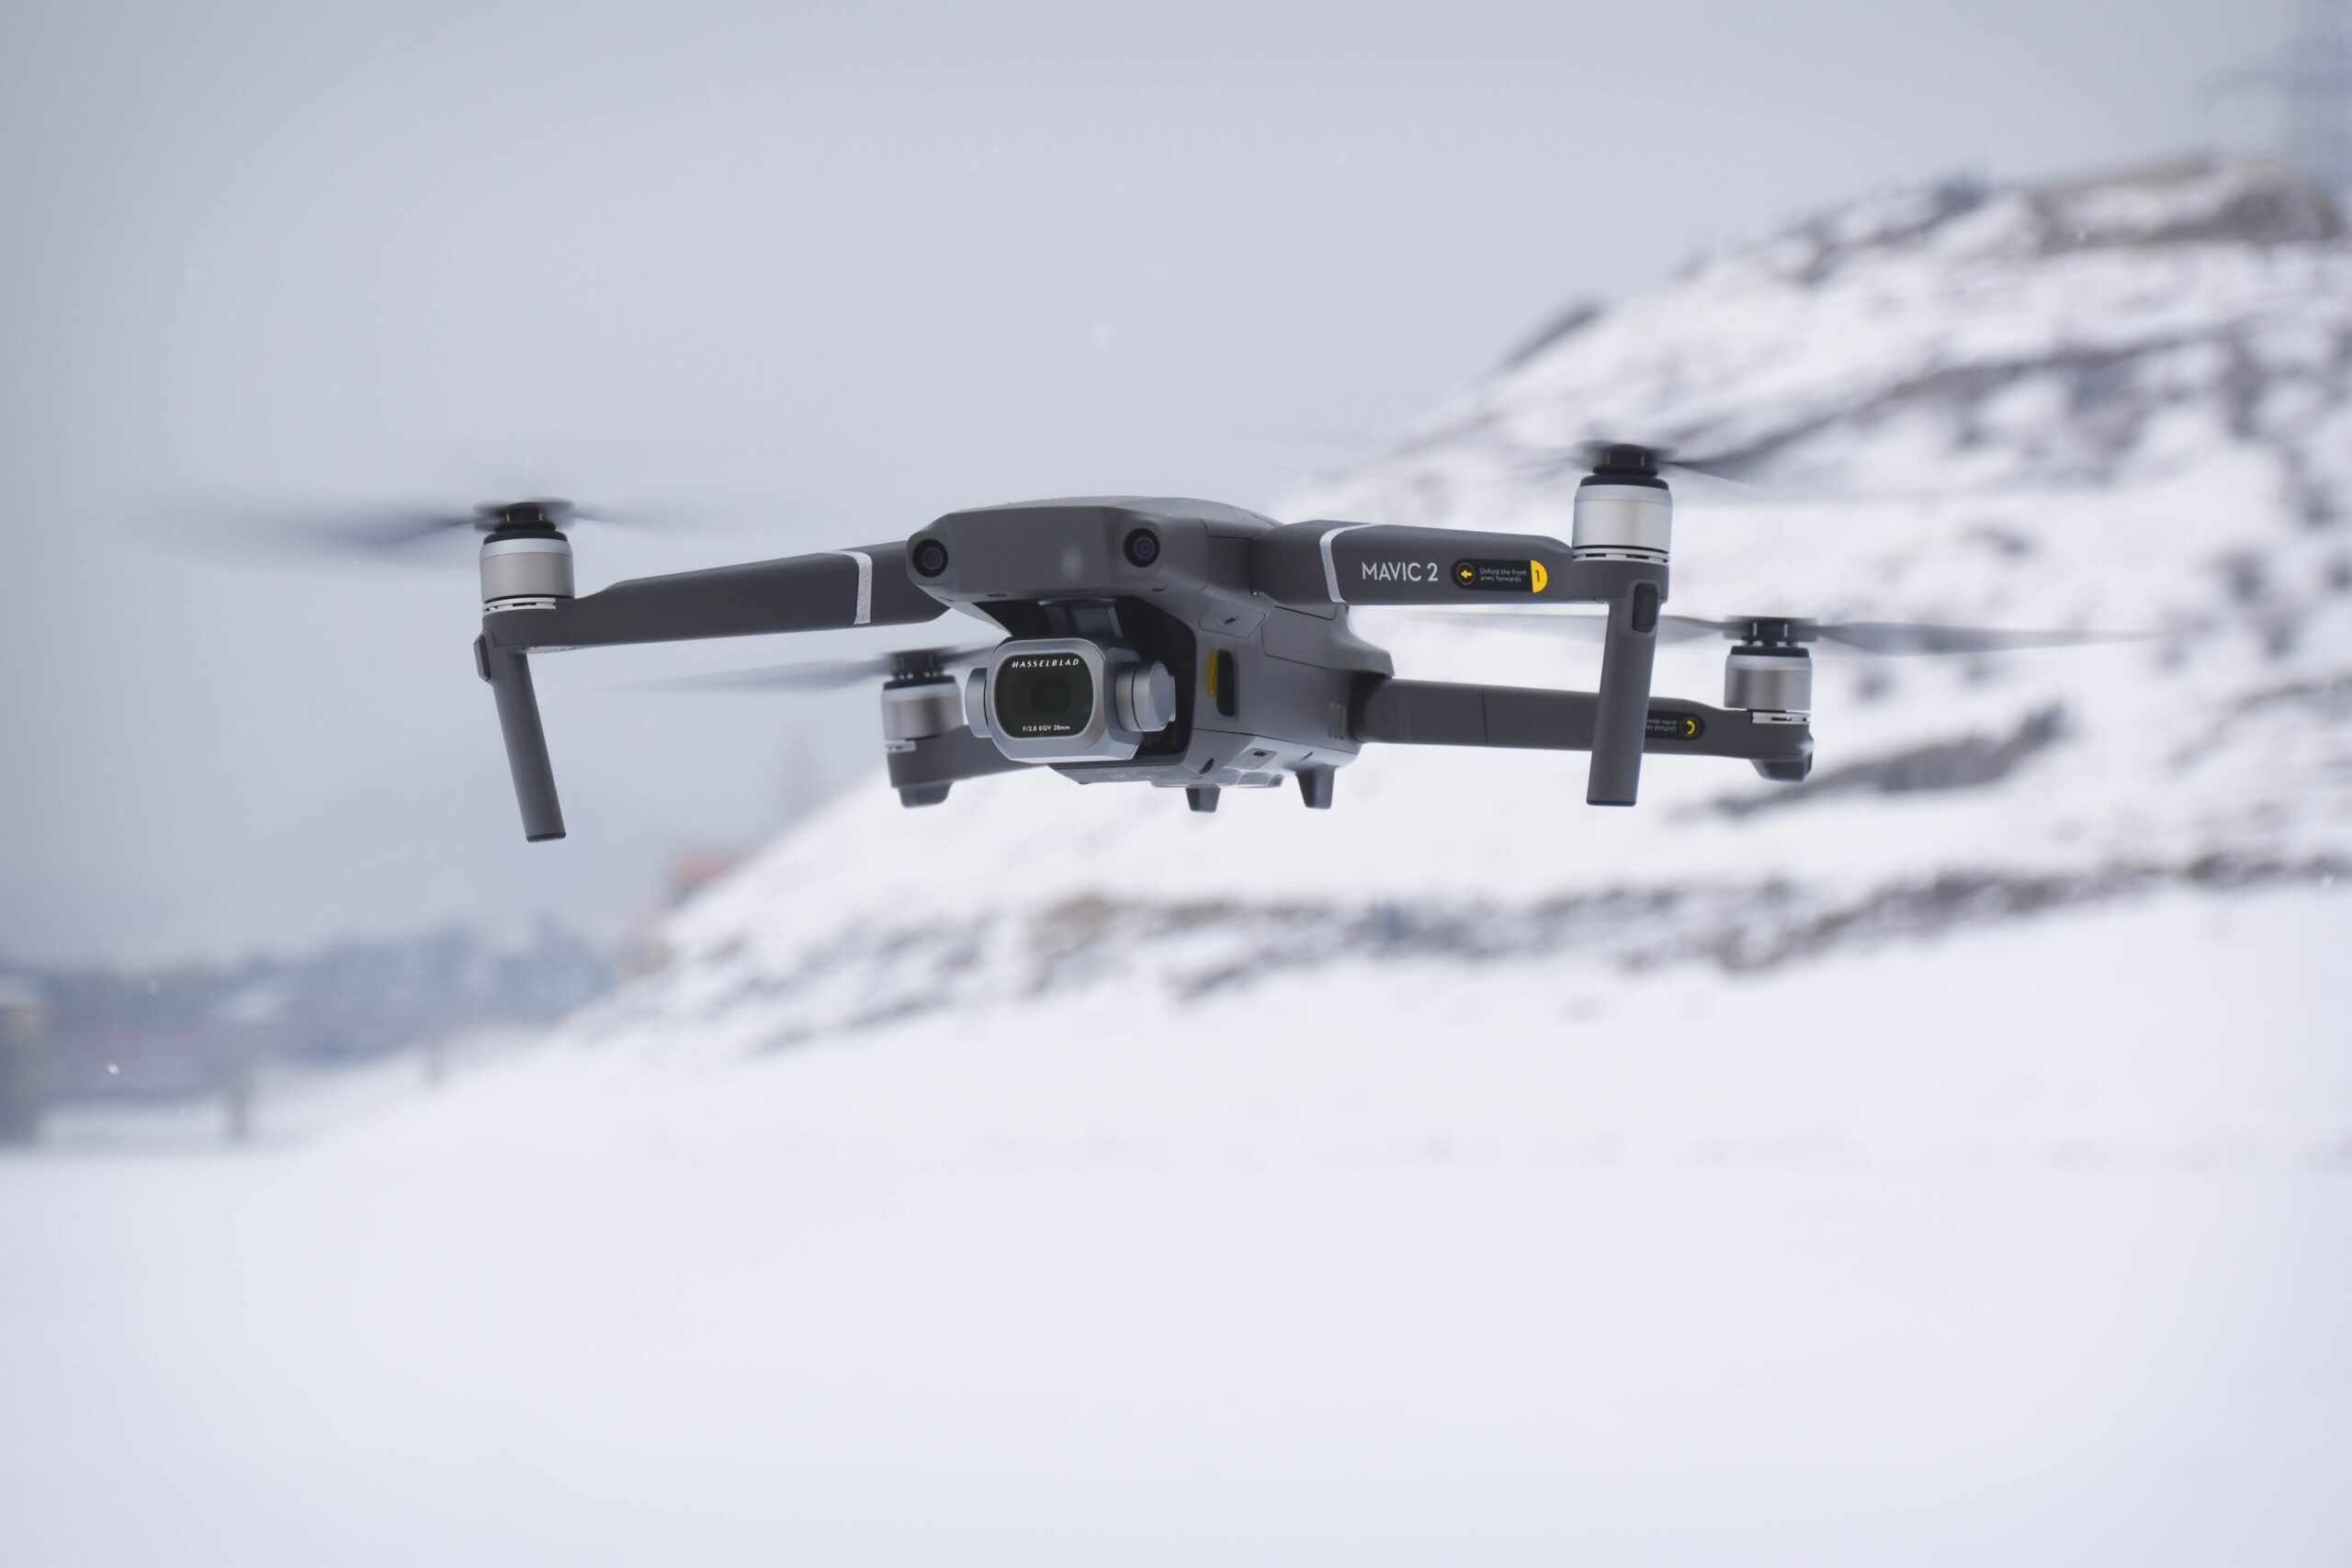 Reliability and durability of DJI drones are important factors in DJI’s market dominance